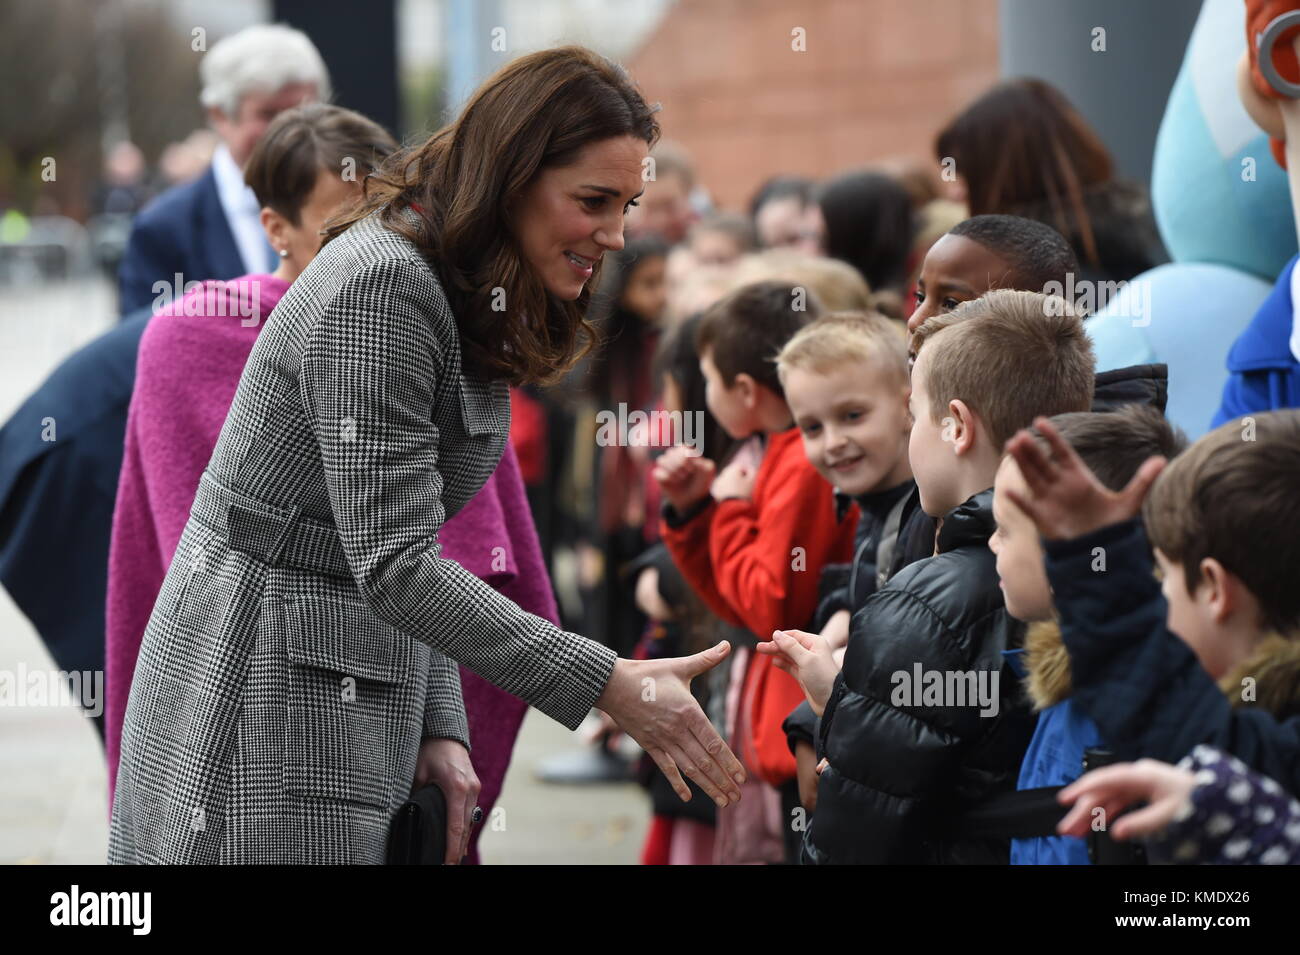 The Duchess of Cambridge greets well-wishers as she arrives for the Children's Global Media Summit at Manchester Central Convention Complex, which brings together creatives, technology innovators, policymakers, executives and thought leaders from around the globe to inform and redesign the future of media for this generation and explore the impact that digital technology will have in children's futures. Stock Photo